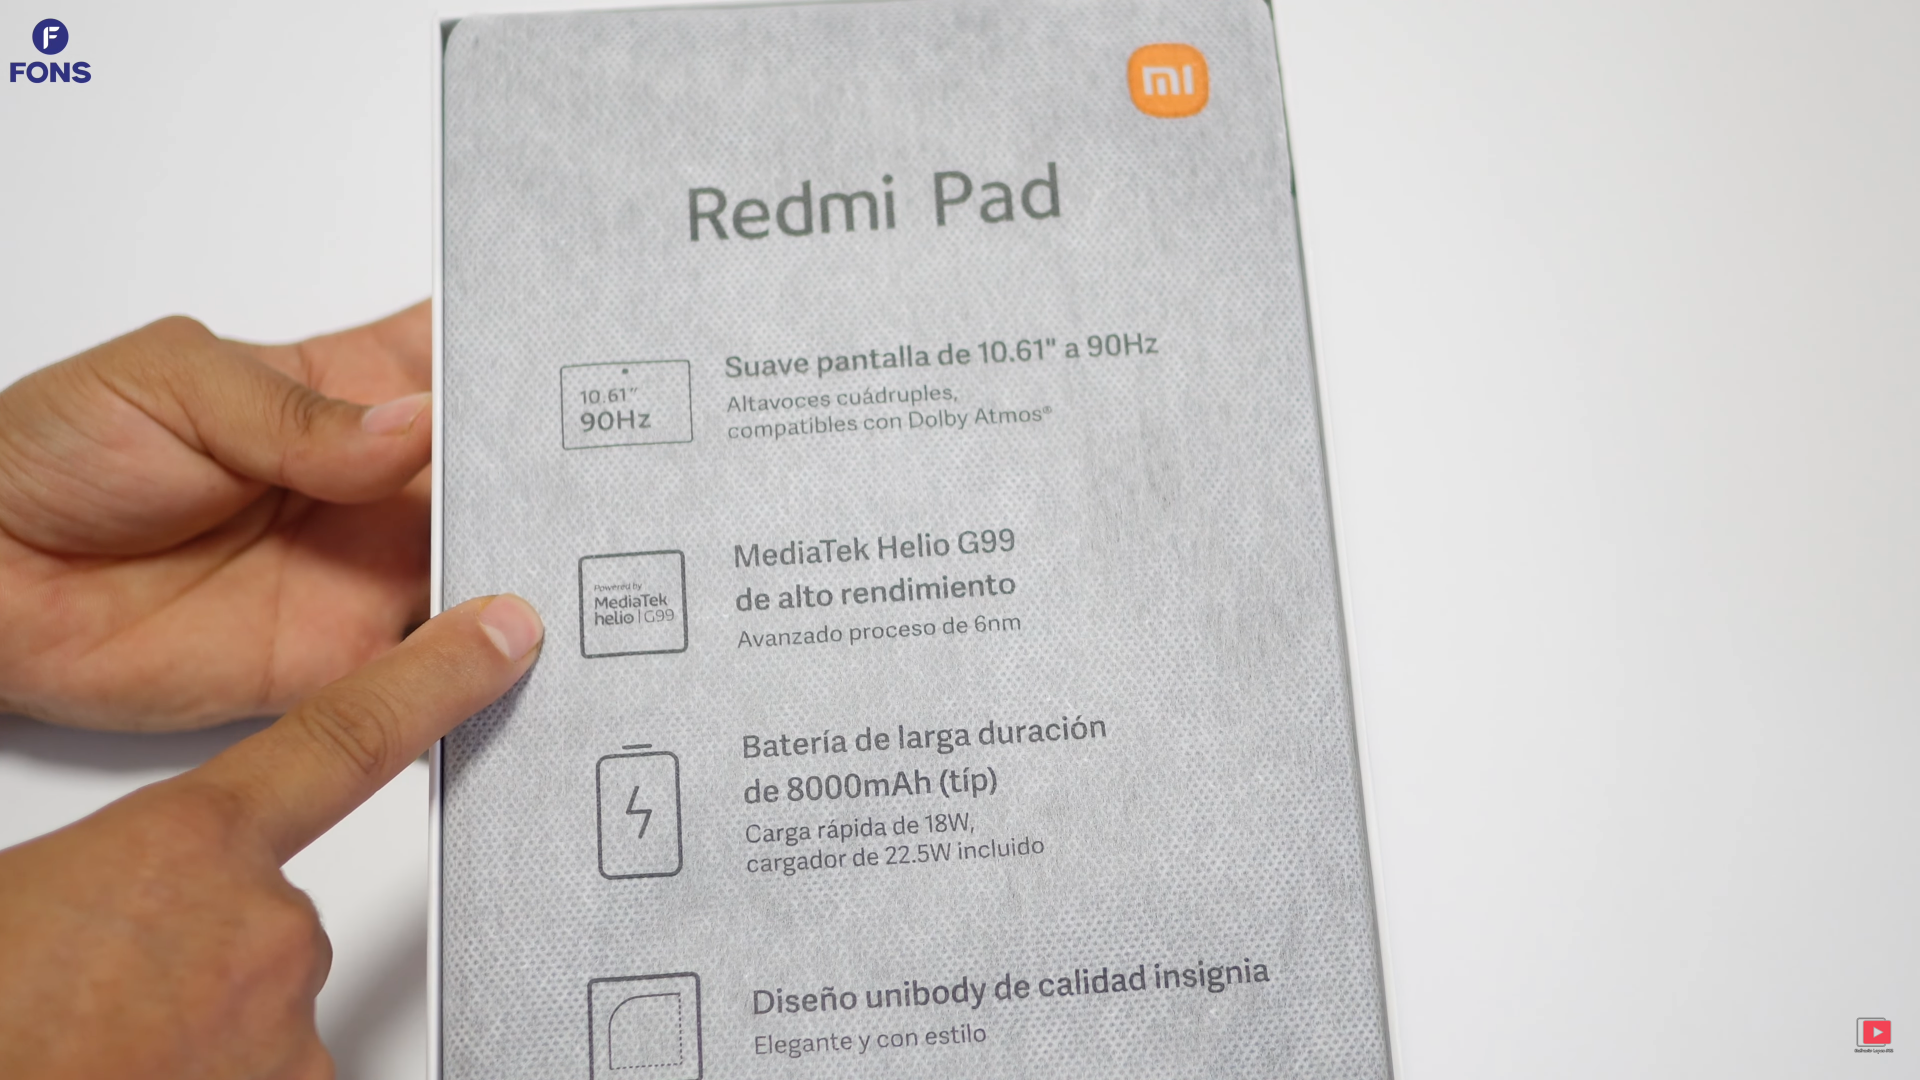 Redmi Pad shown in MediaTek battery processor Helio before 90 and announcement: video 8000 mAh G99 tablet screen, Hz the with